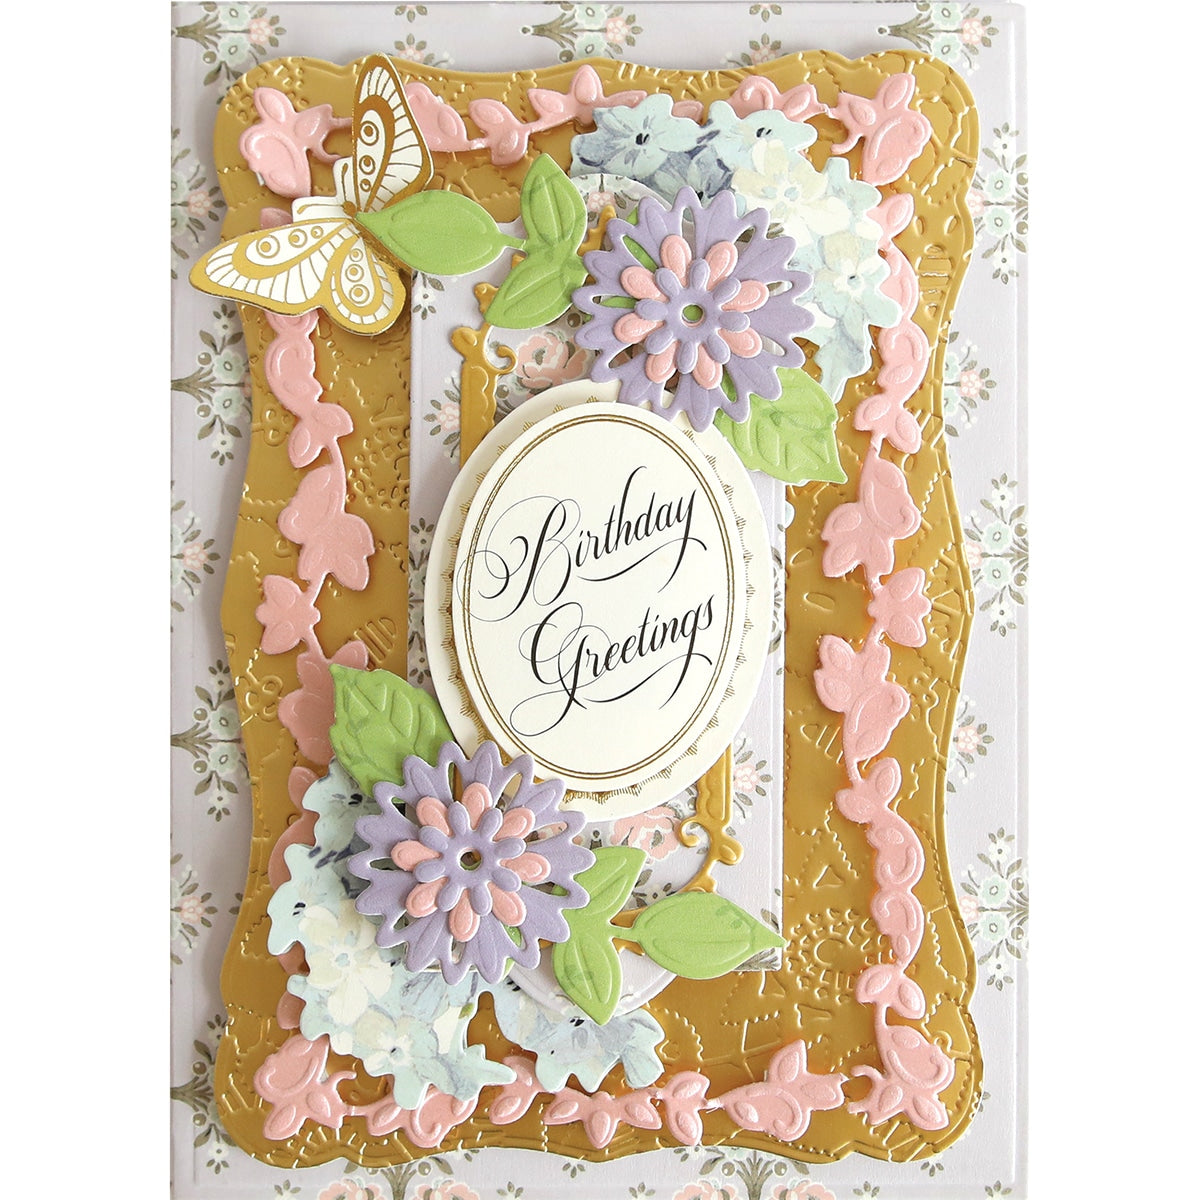 a birthday card with flowers and butterflies on it.